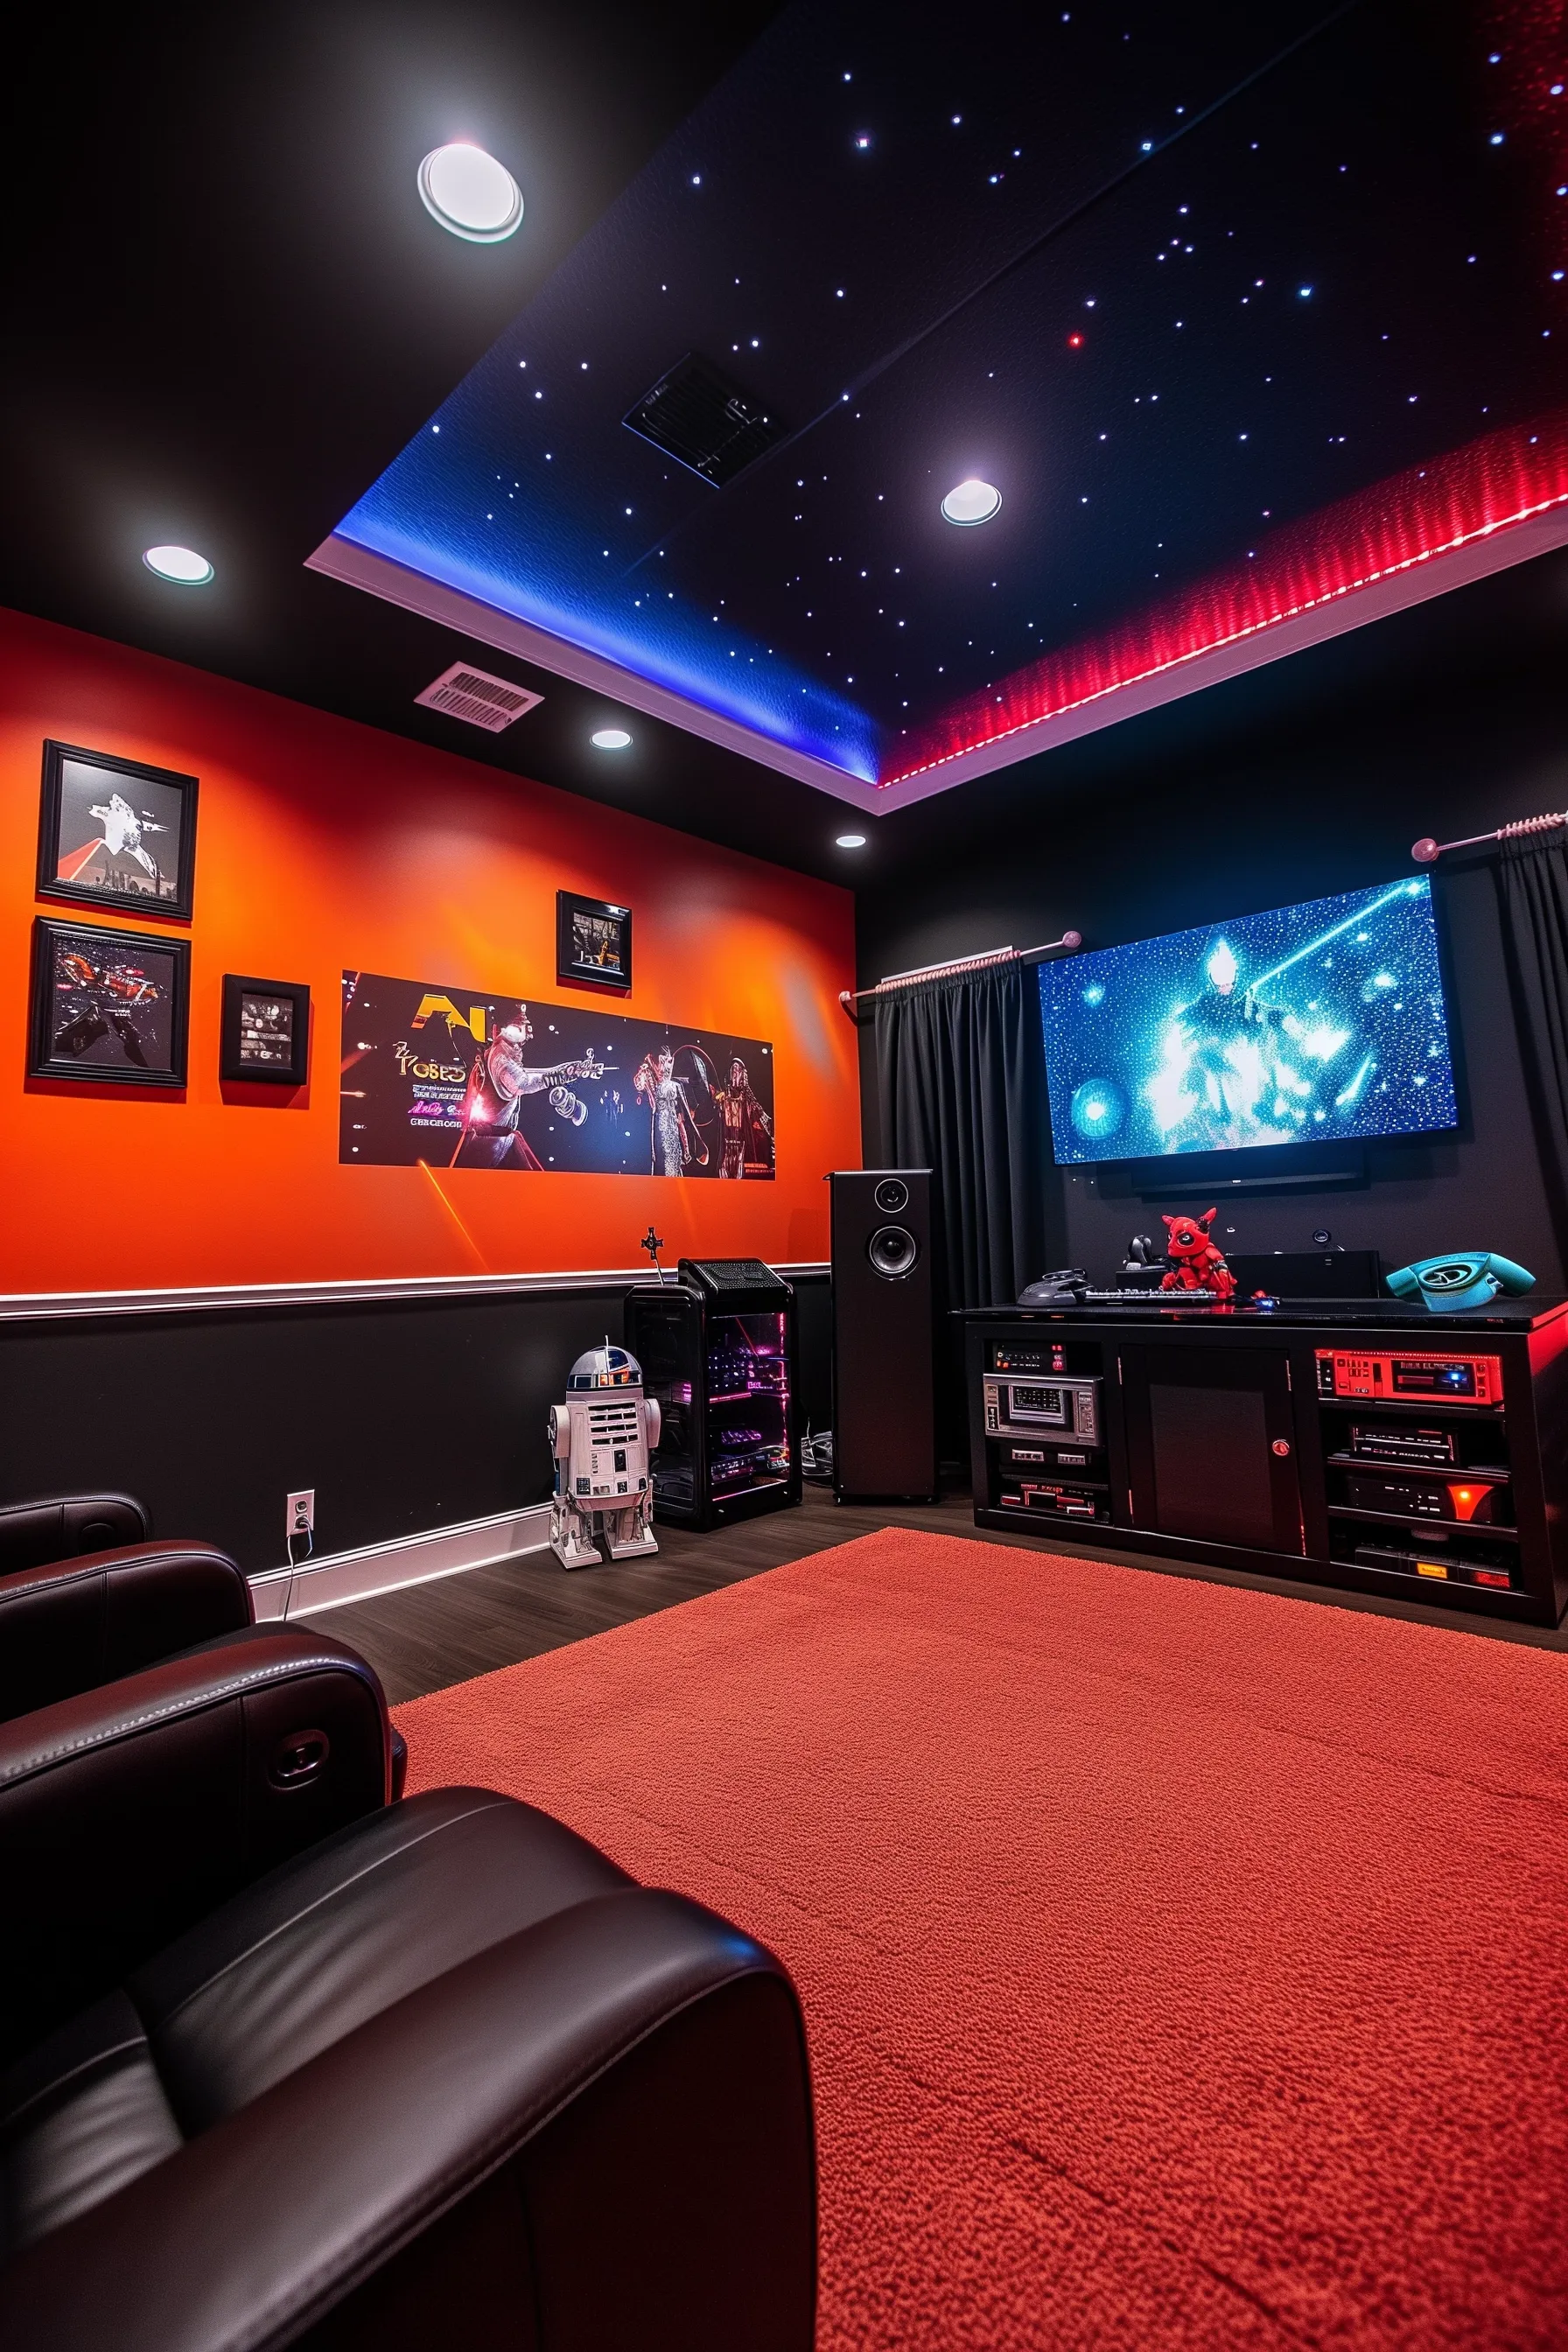 A blue and red themed game star wars game room